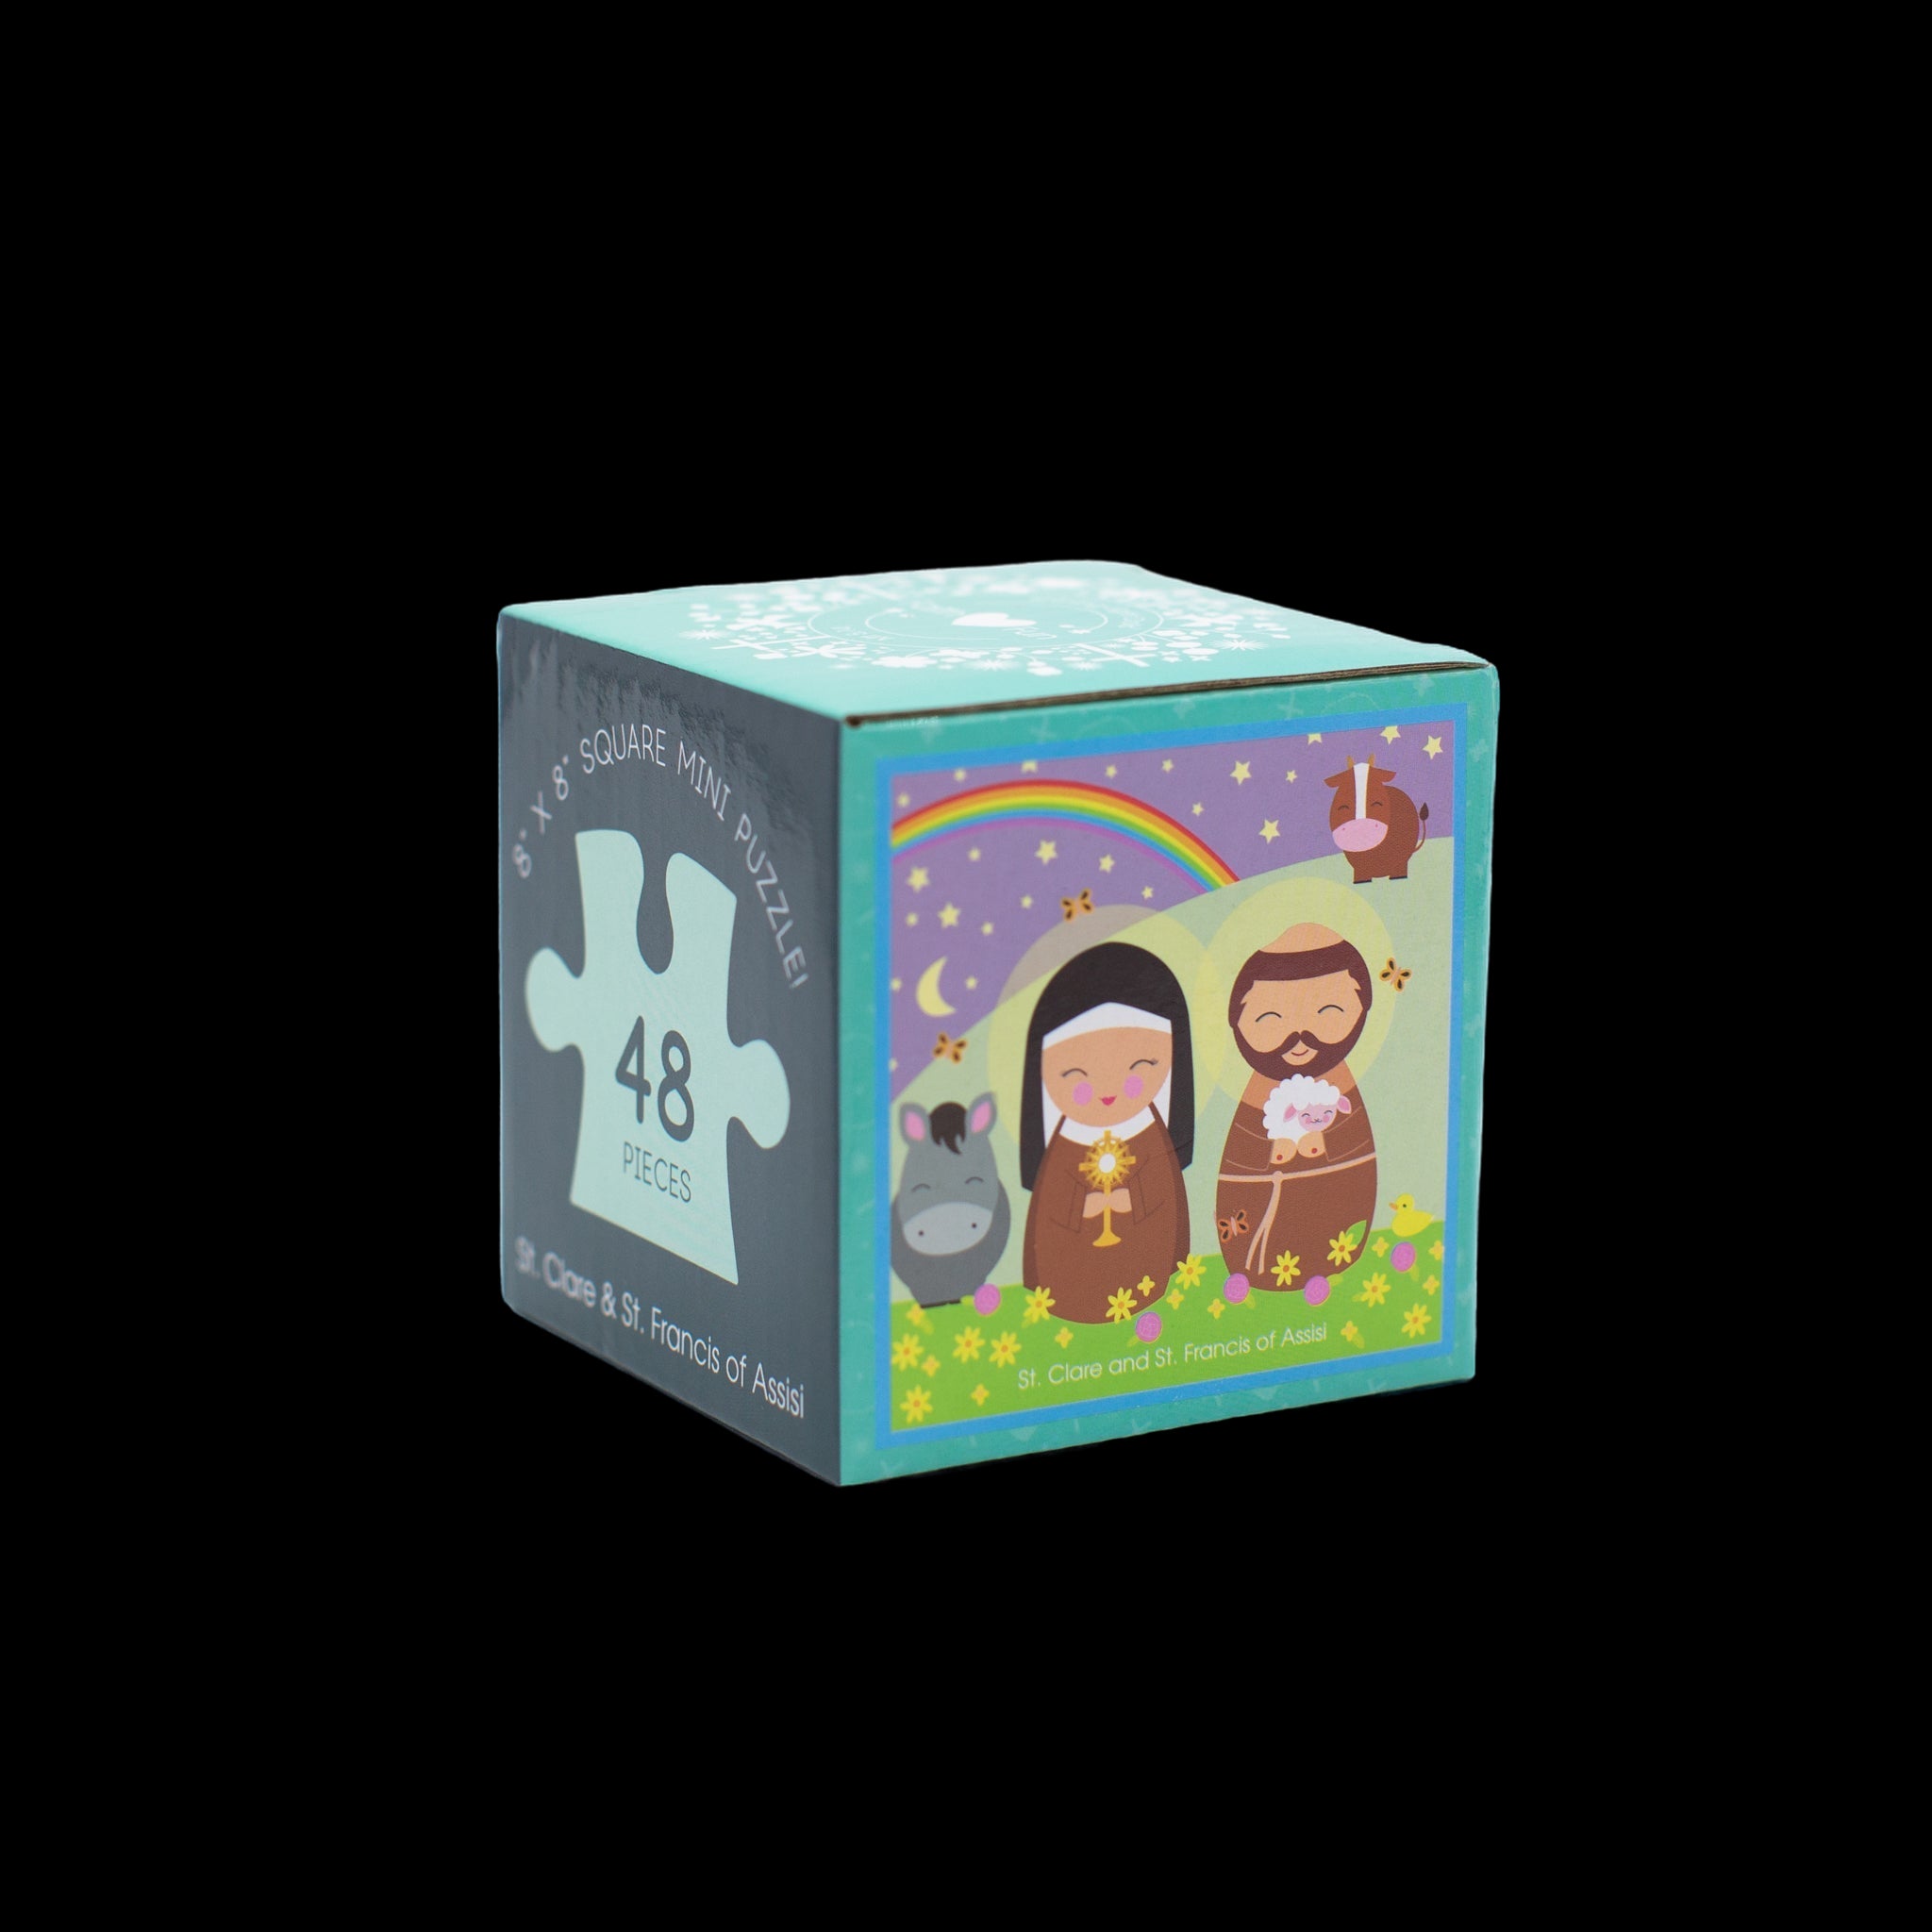 St. Clare And St. Francis Of Assisi Mini Puzzle